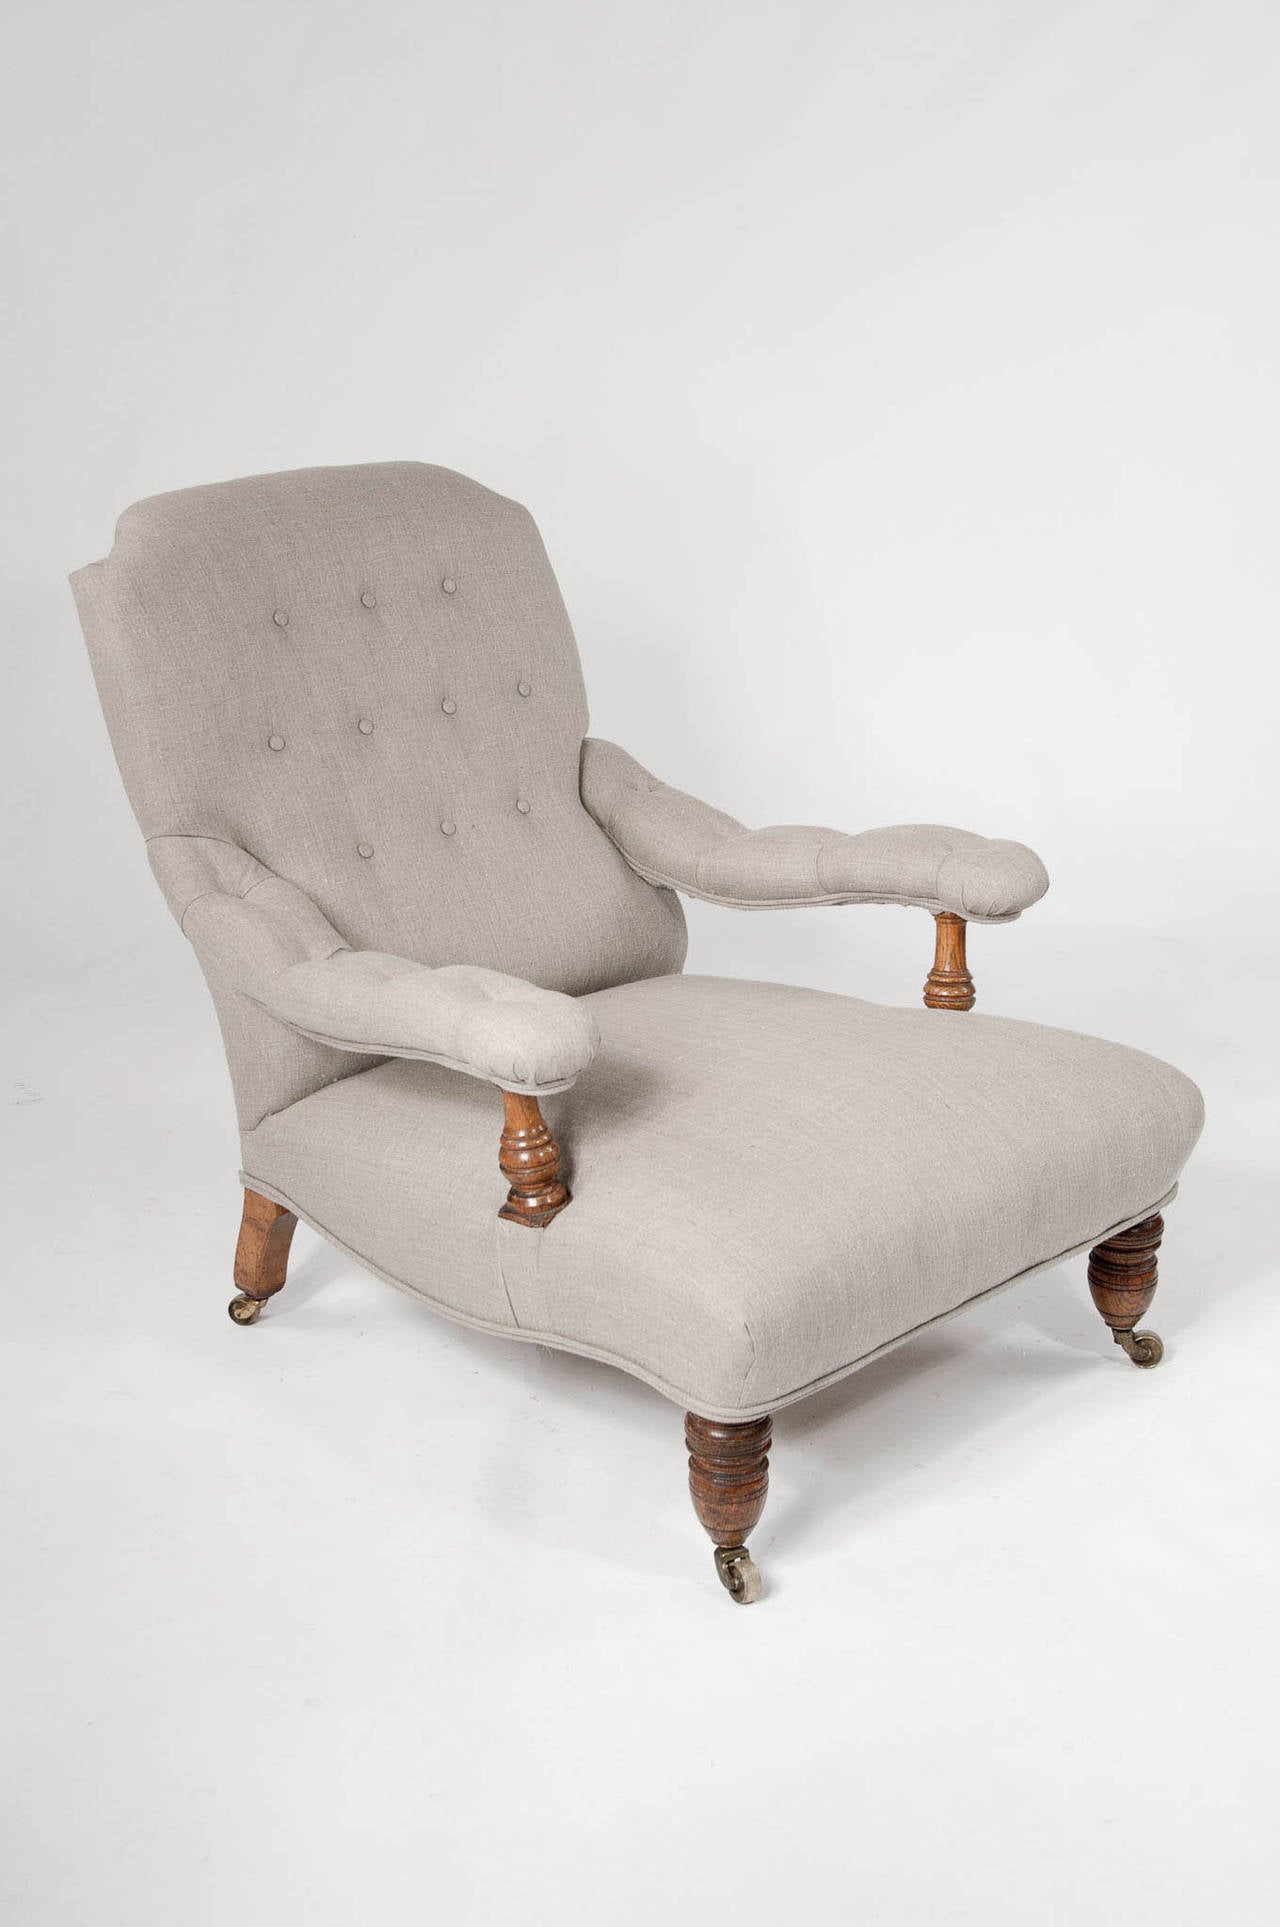 Quality late 19th Century Oak English country house armchair in the manner of Howard & Son. This super comfortable light honey oak armchair dating to circa 1880 is typical of the famous Howard and Sons style with the low deep seat having gently